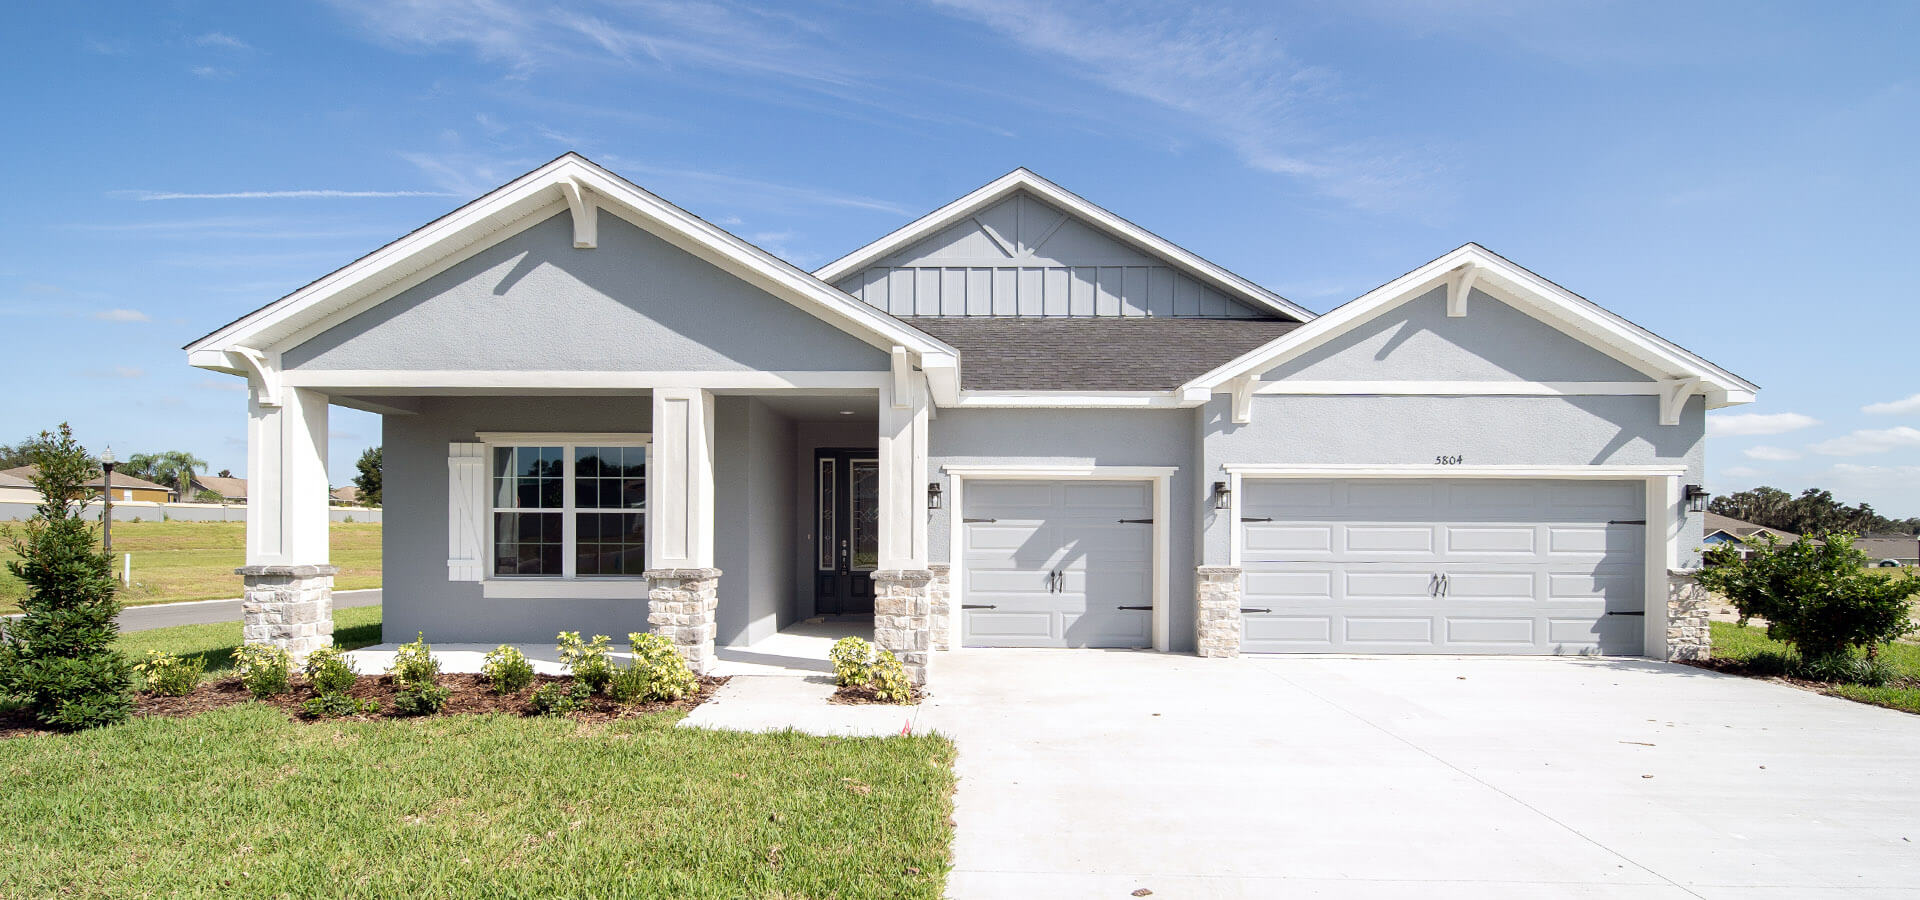 Florida new home exterior with 3-car garage and large columned front porch